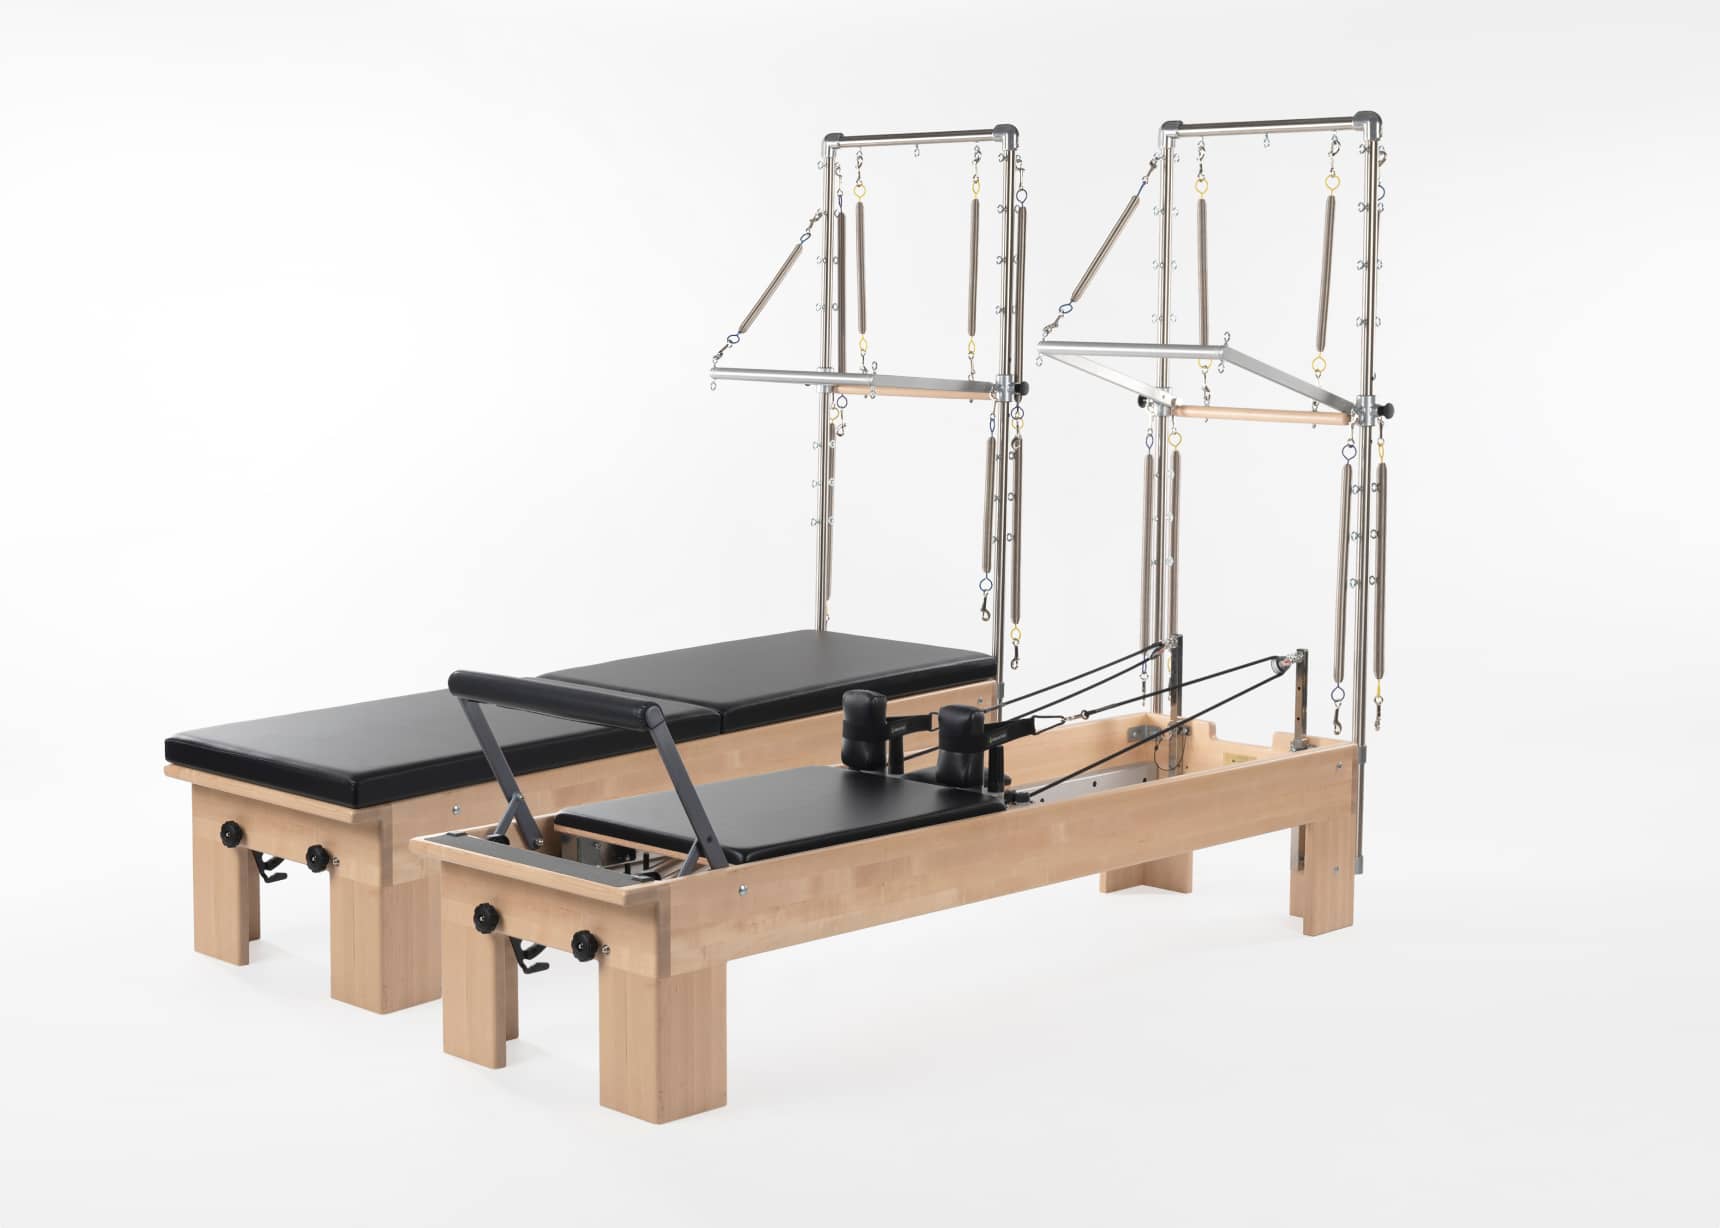 REFORMER TRAPEZE COMBINATION Pilates reformer By Balanced Body